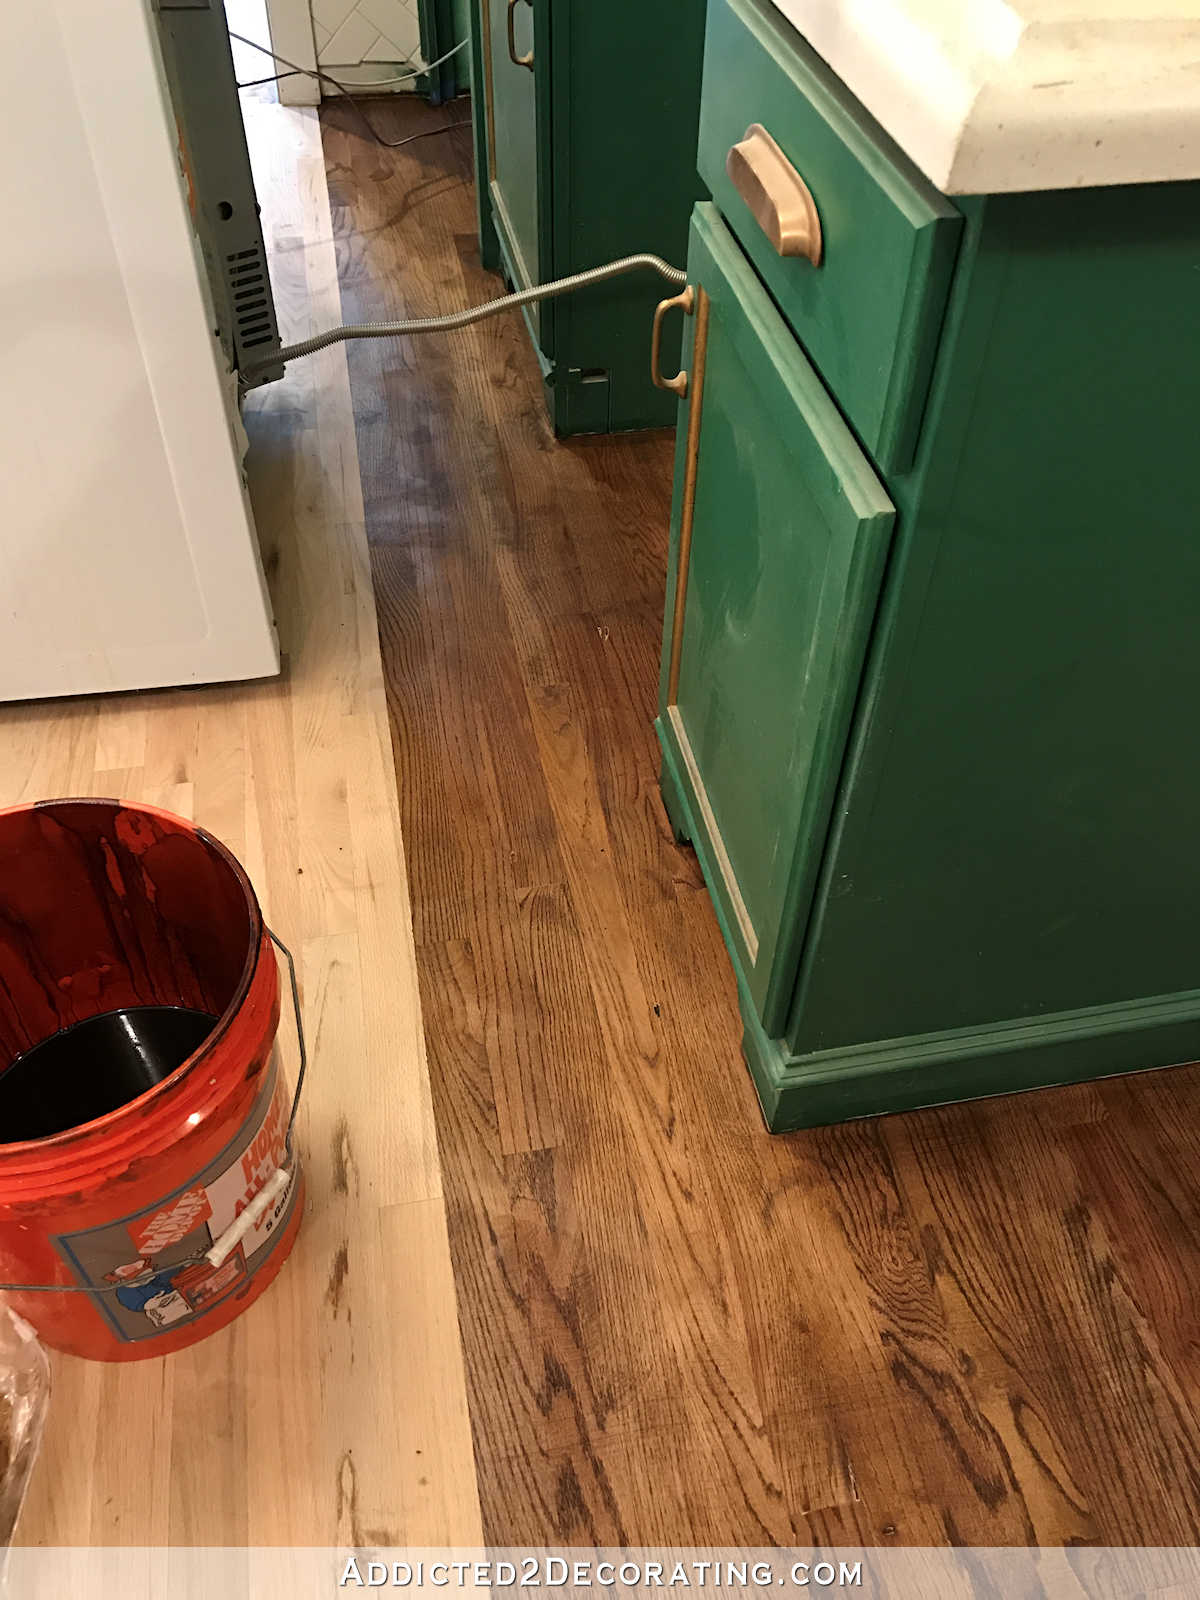 staining red oak hardwood floors - 10 - stain on kitchen floor behind stove and refrigerator